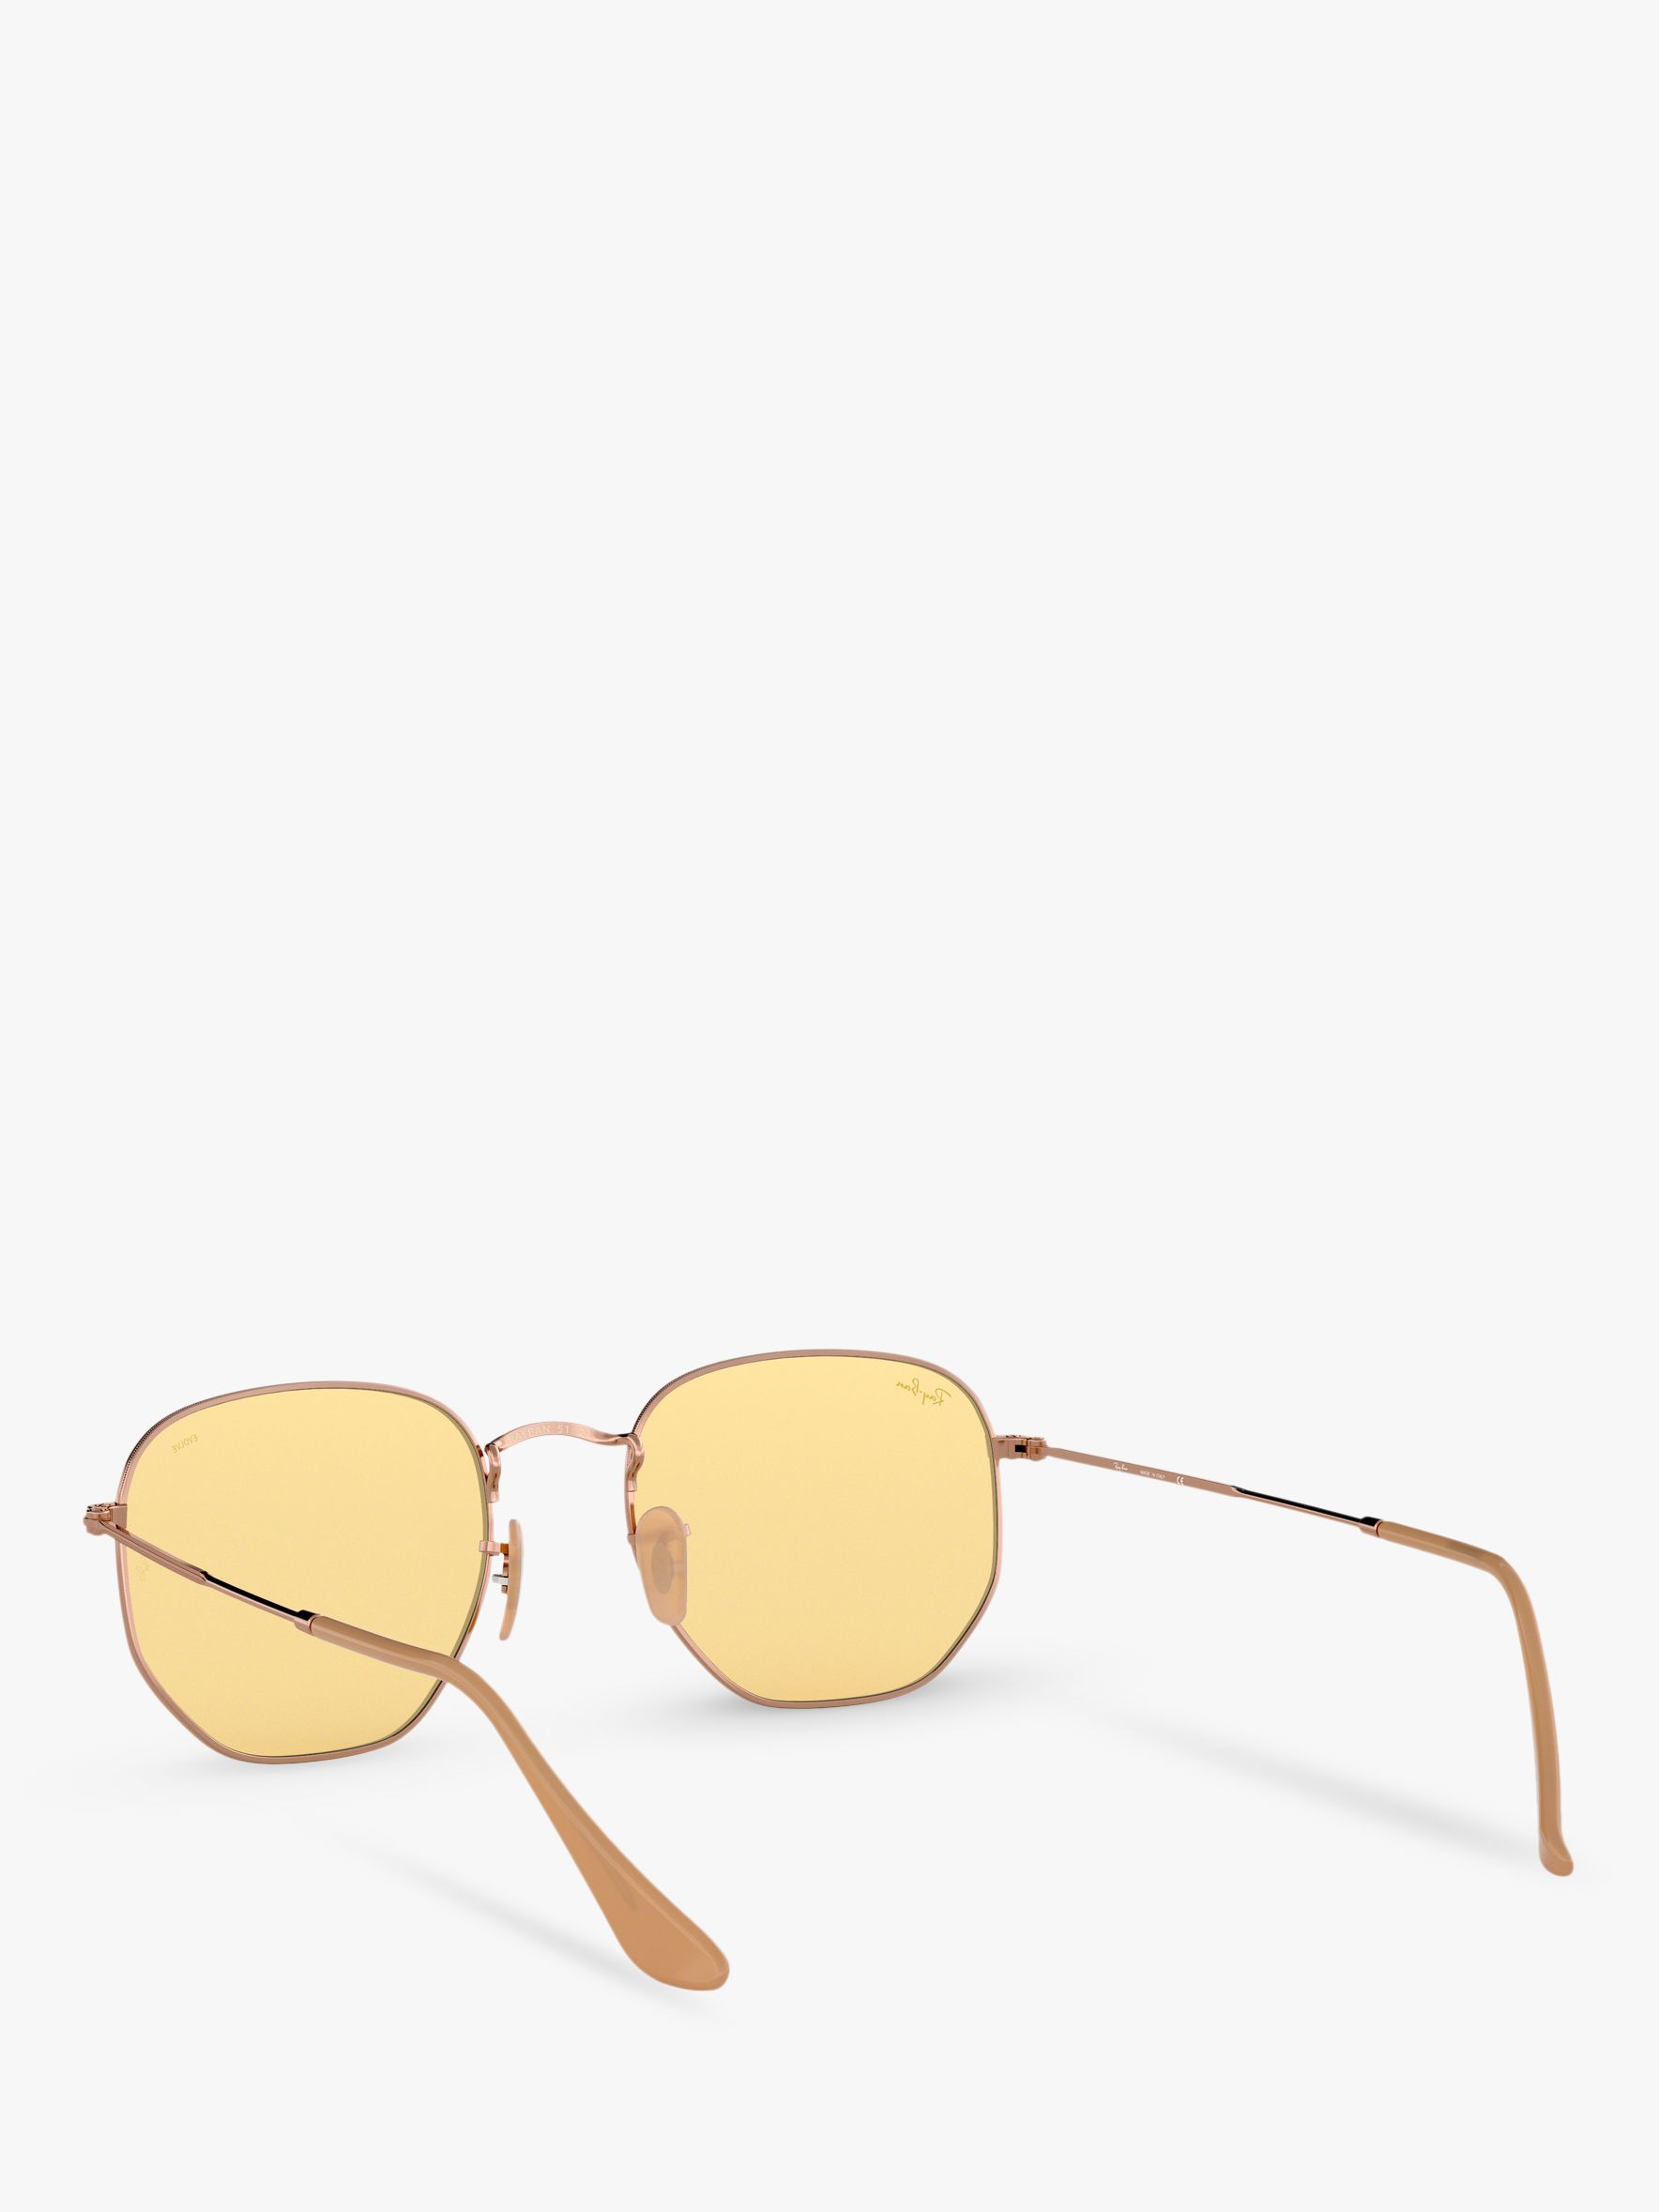 Ray Ban Rb3548n Hexgonal Sunglasses Copper Yellow At John Lewis And Partners